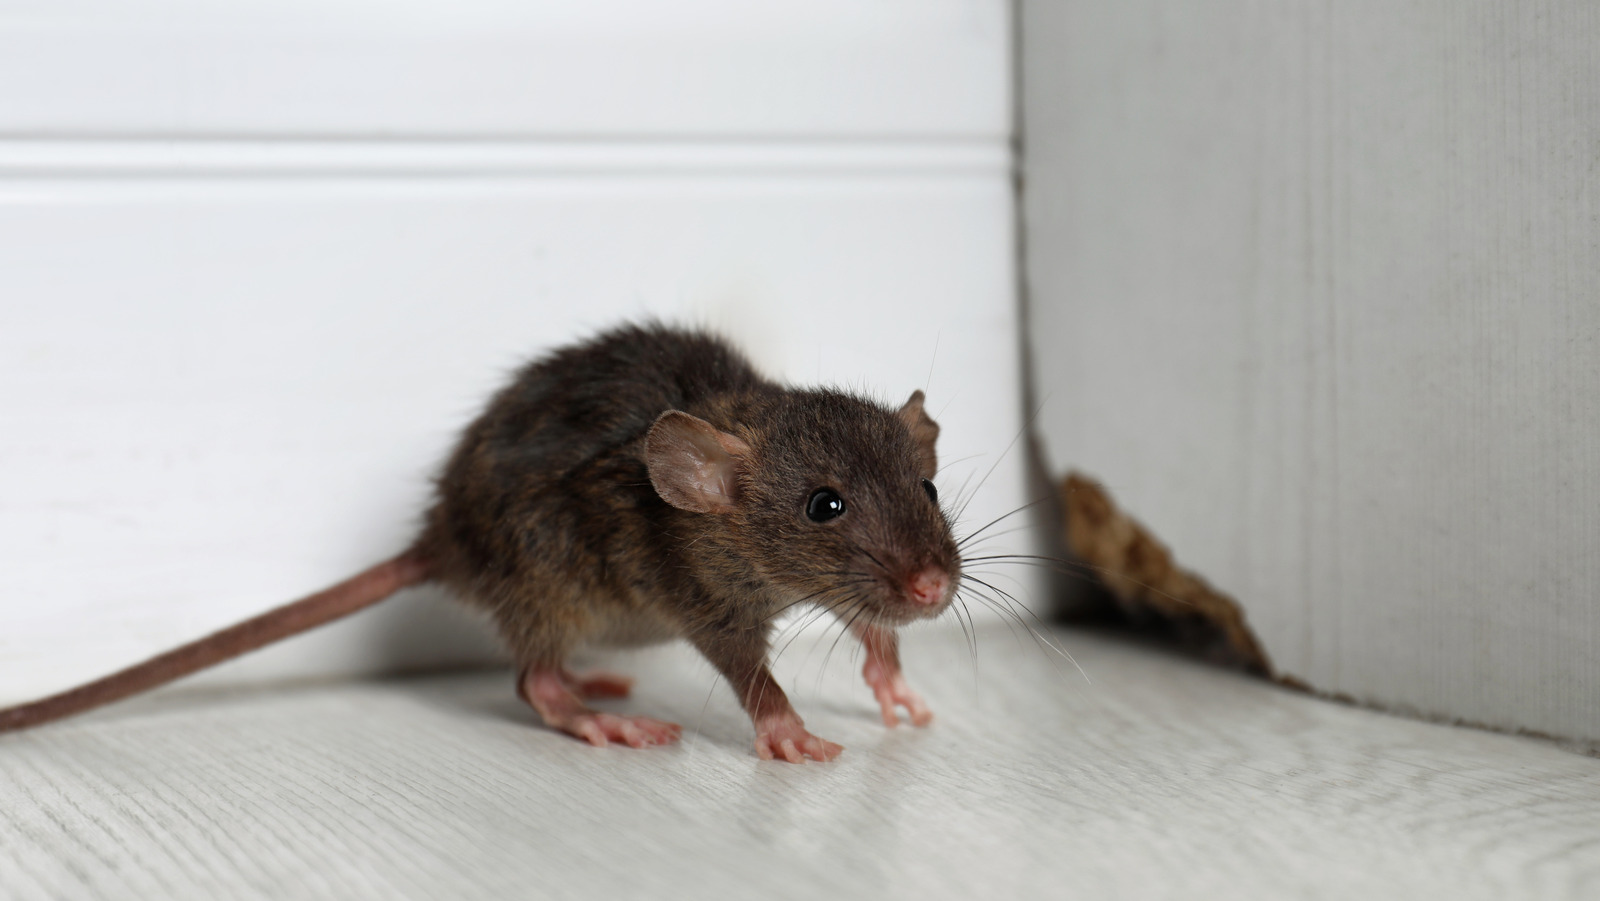 Does Oregano Really Double As An Effective Mouse And Rat Repellent?